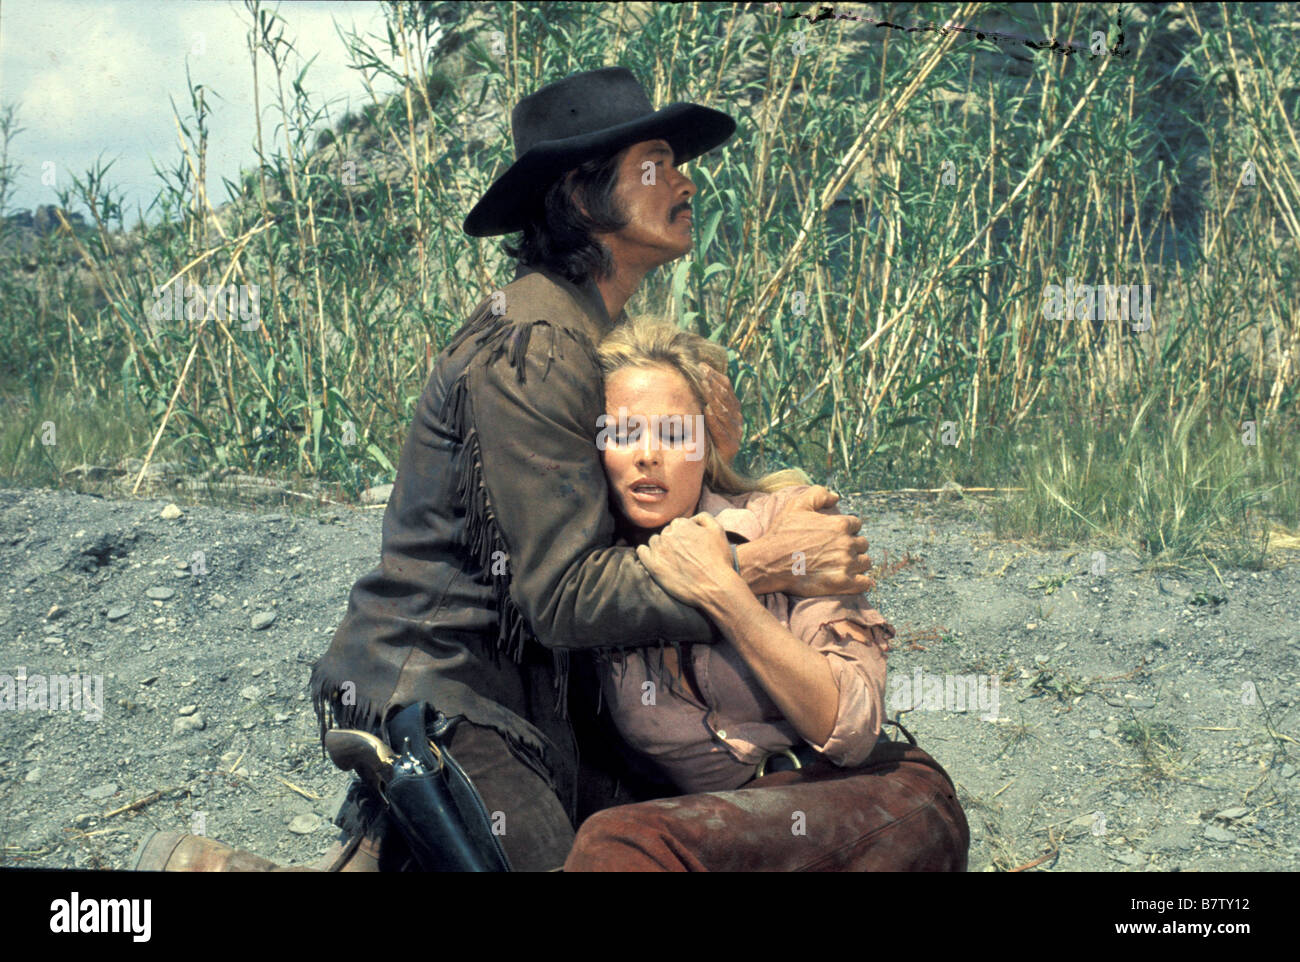 Red Sun  Year: 1971 - Spain / Italy / France Charles Bronson, Ursula Andress  Director: Terence Young Stock Photo